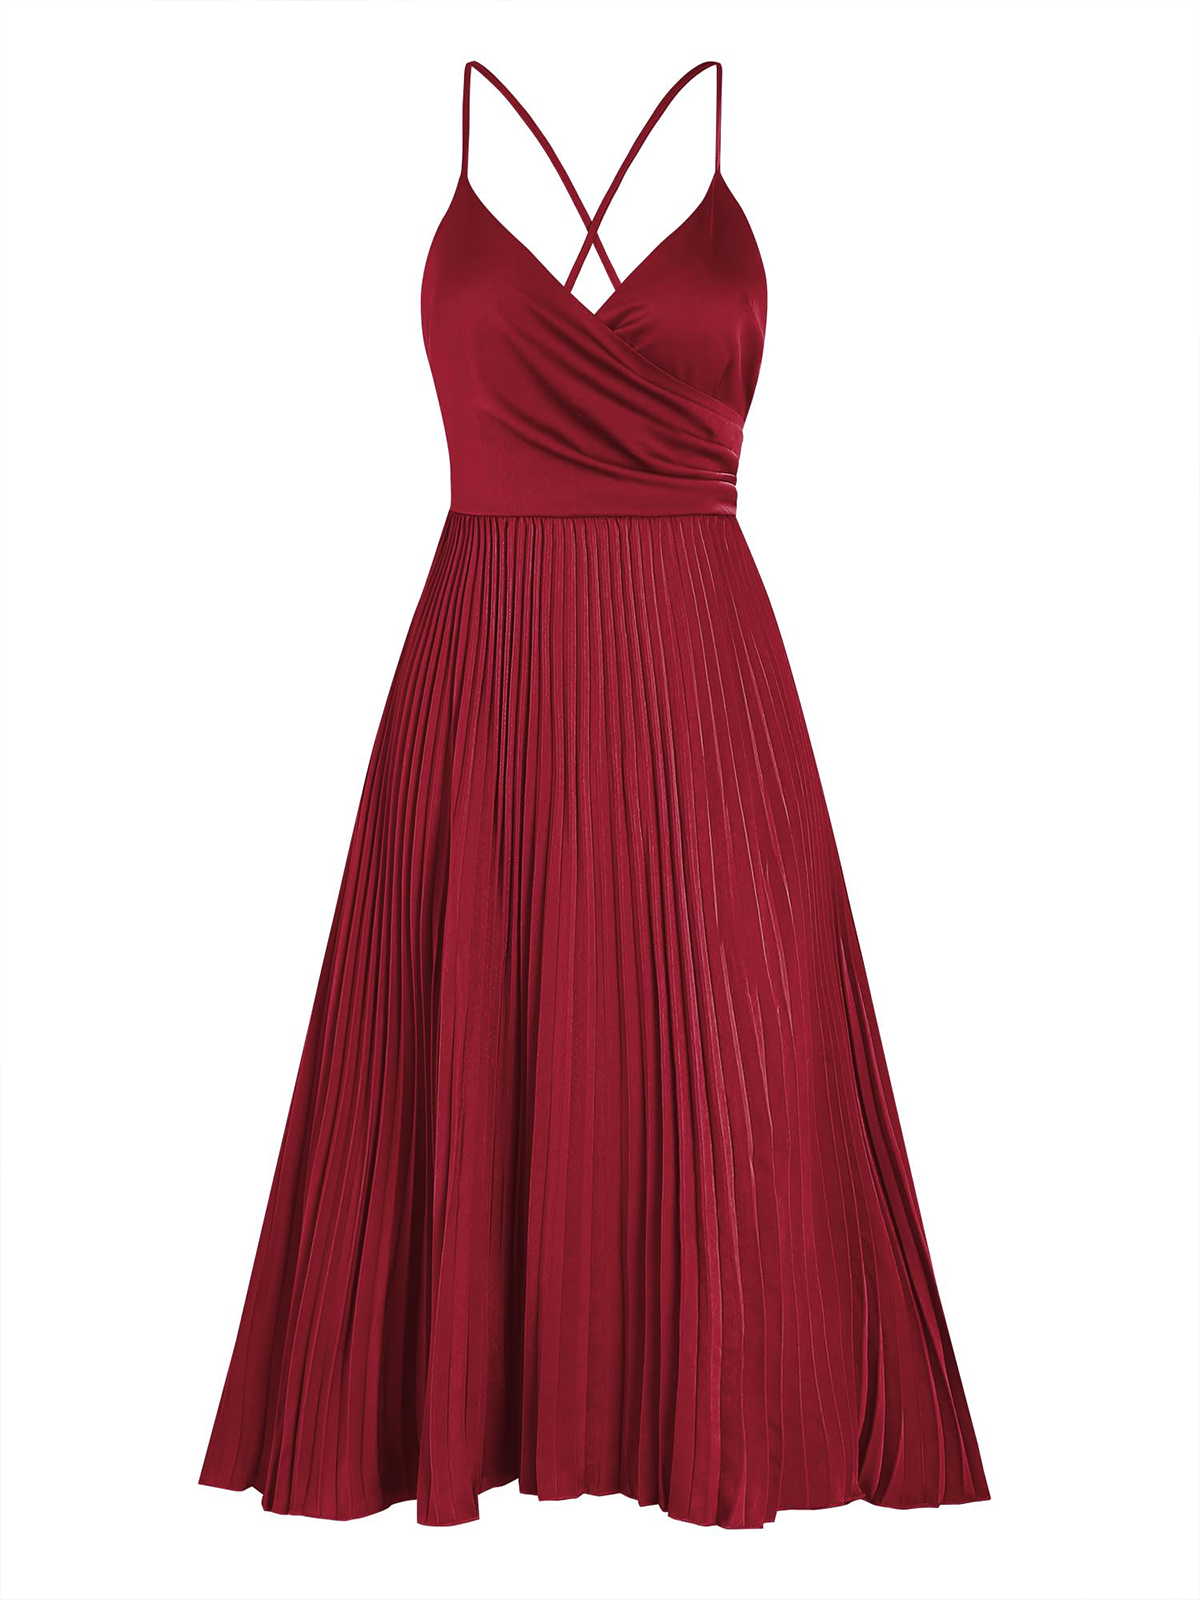 Satin-Sexy-Gown-Dress-Red-2